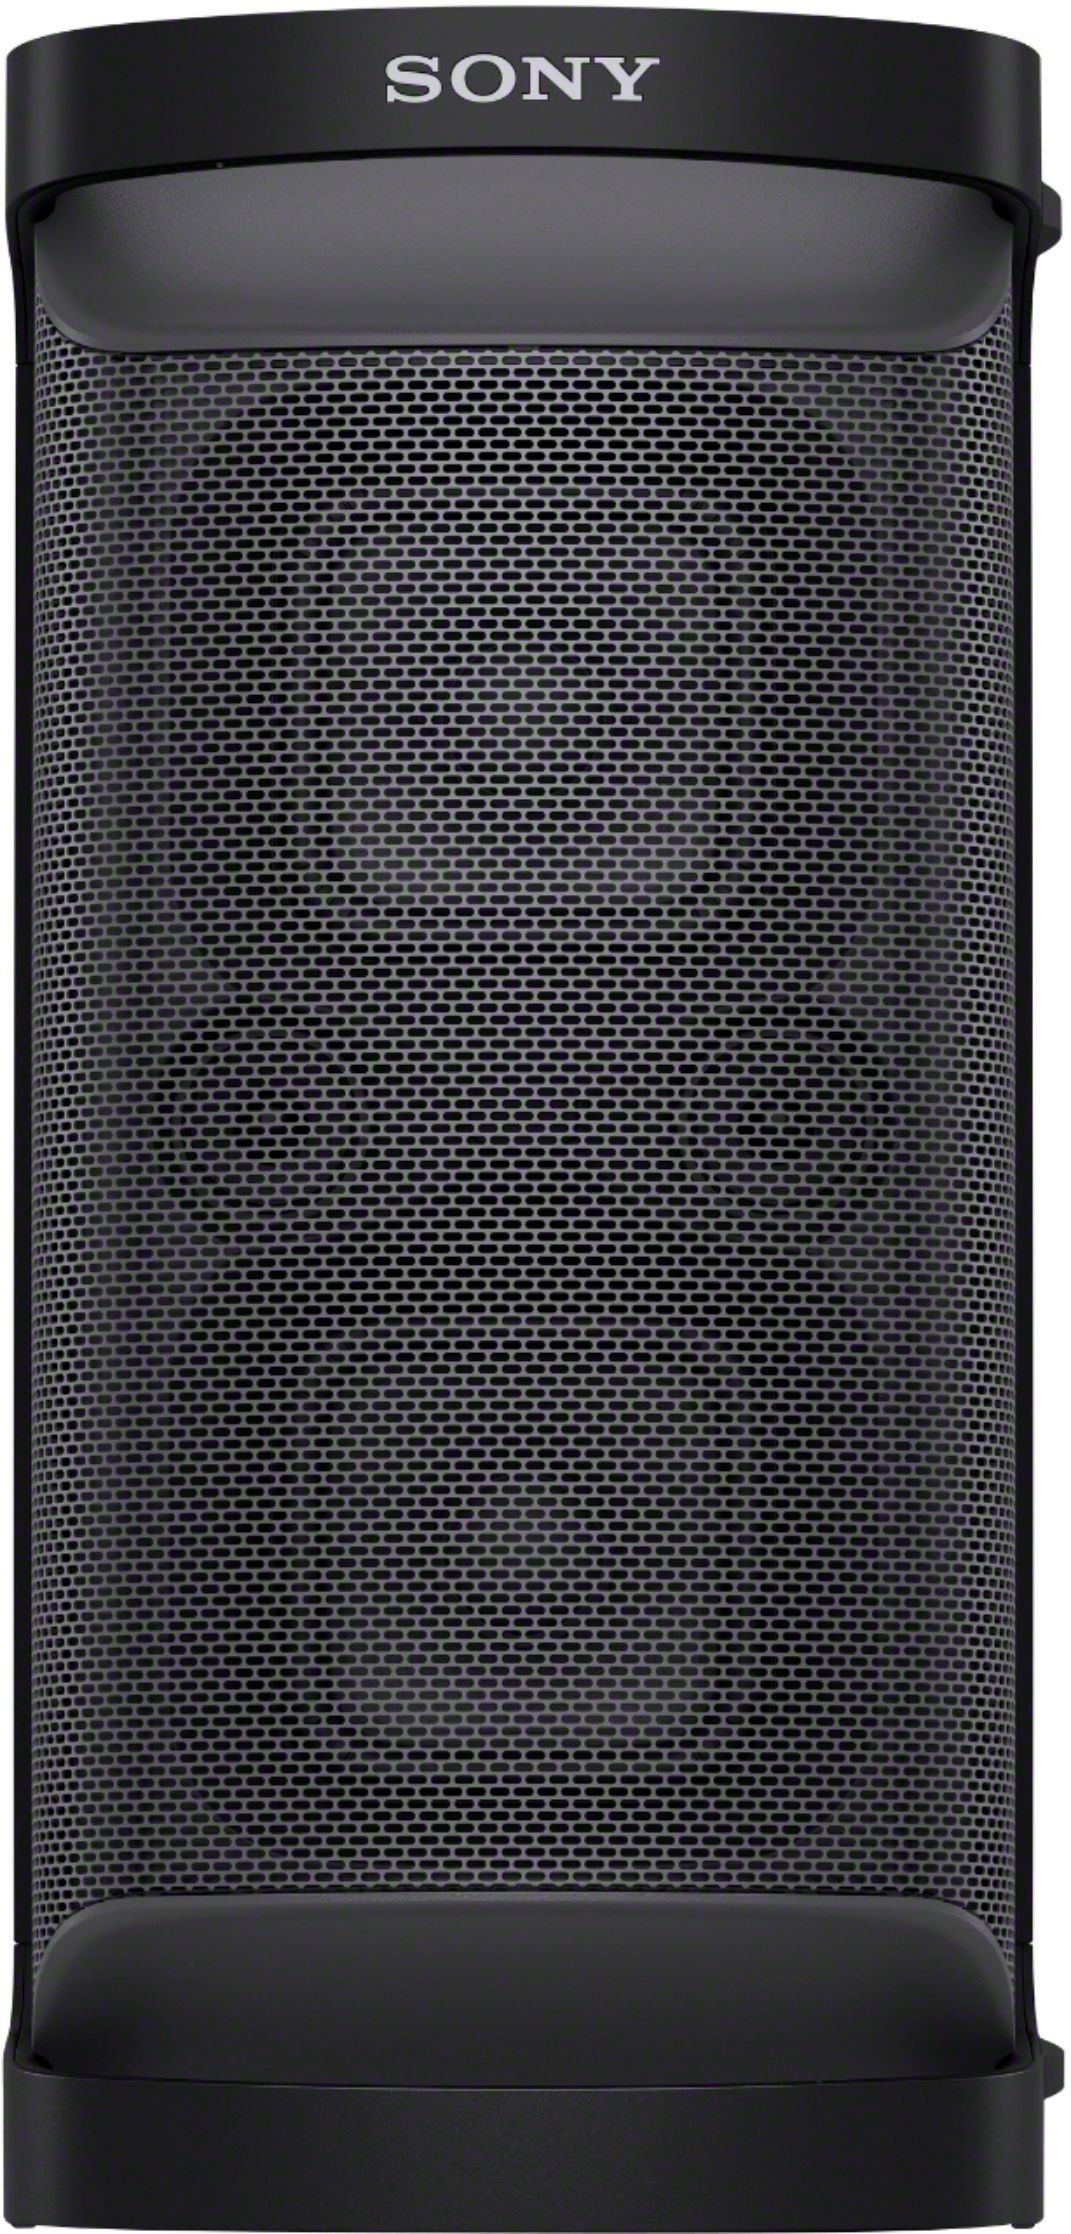 Sony XP500 Portable Bluetooth Party Speaker with Water Resistance Black  SRSXP500 - Best Buy